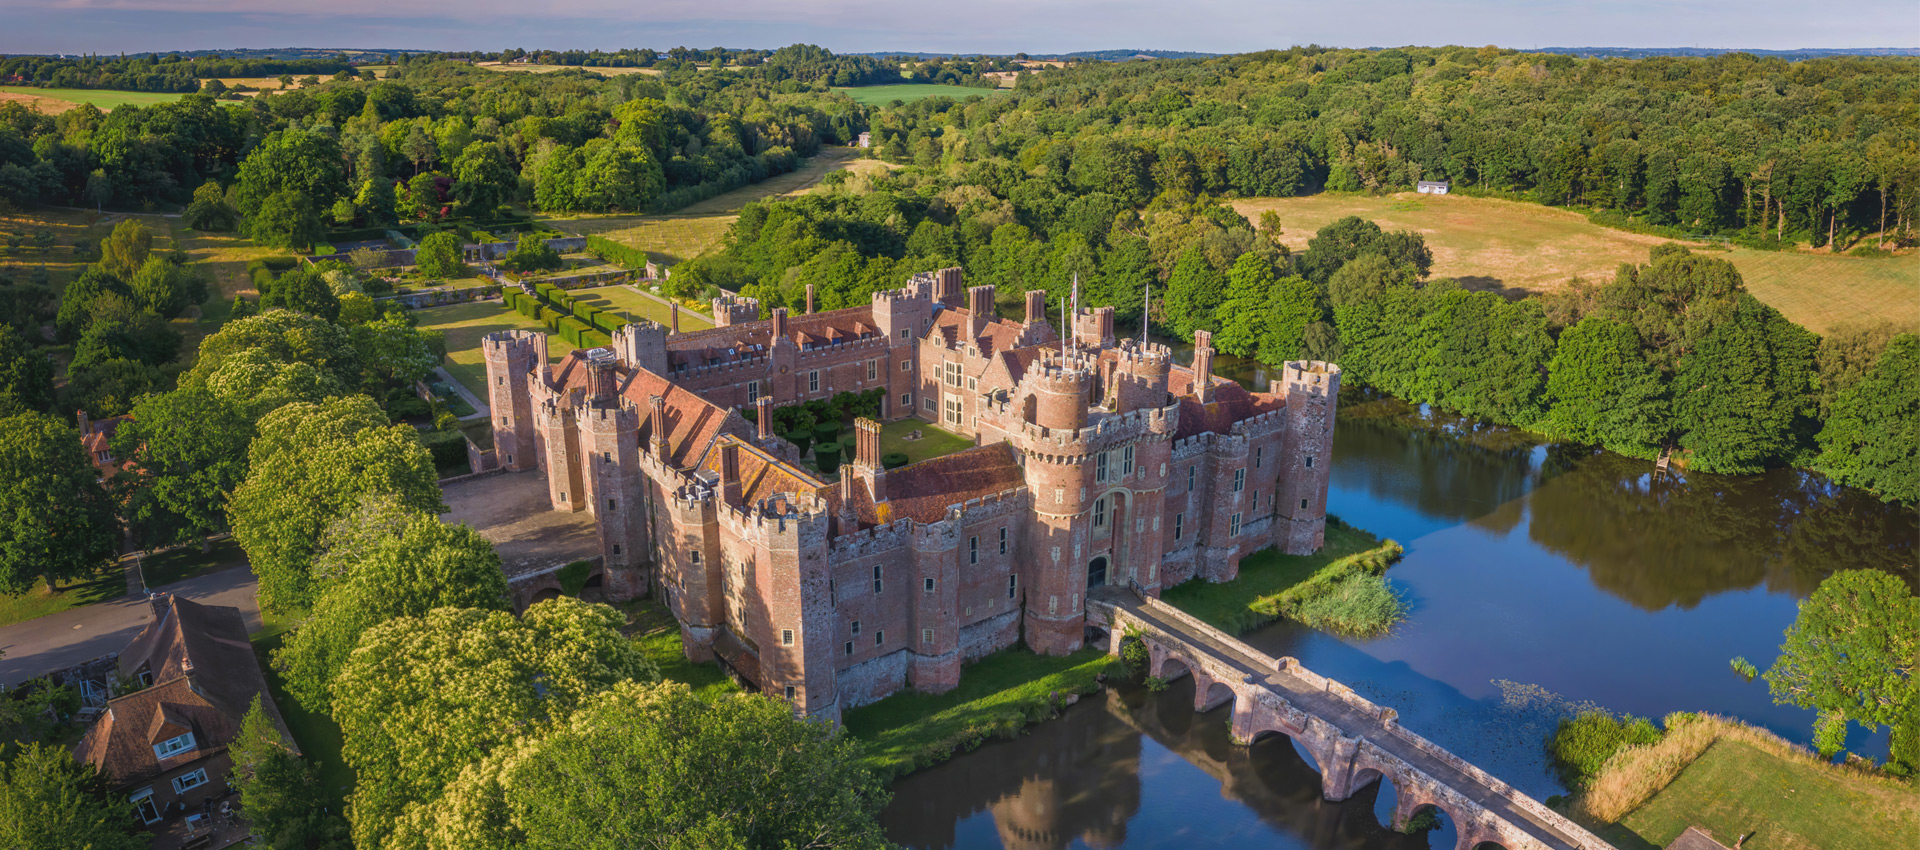 Aeriel view of Herstmonceaux Castle in England during the summer.